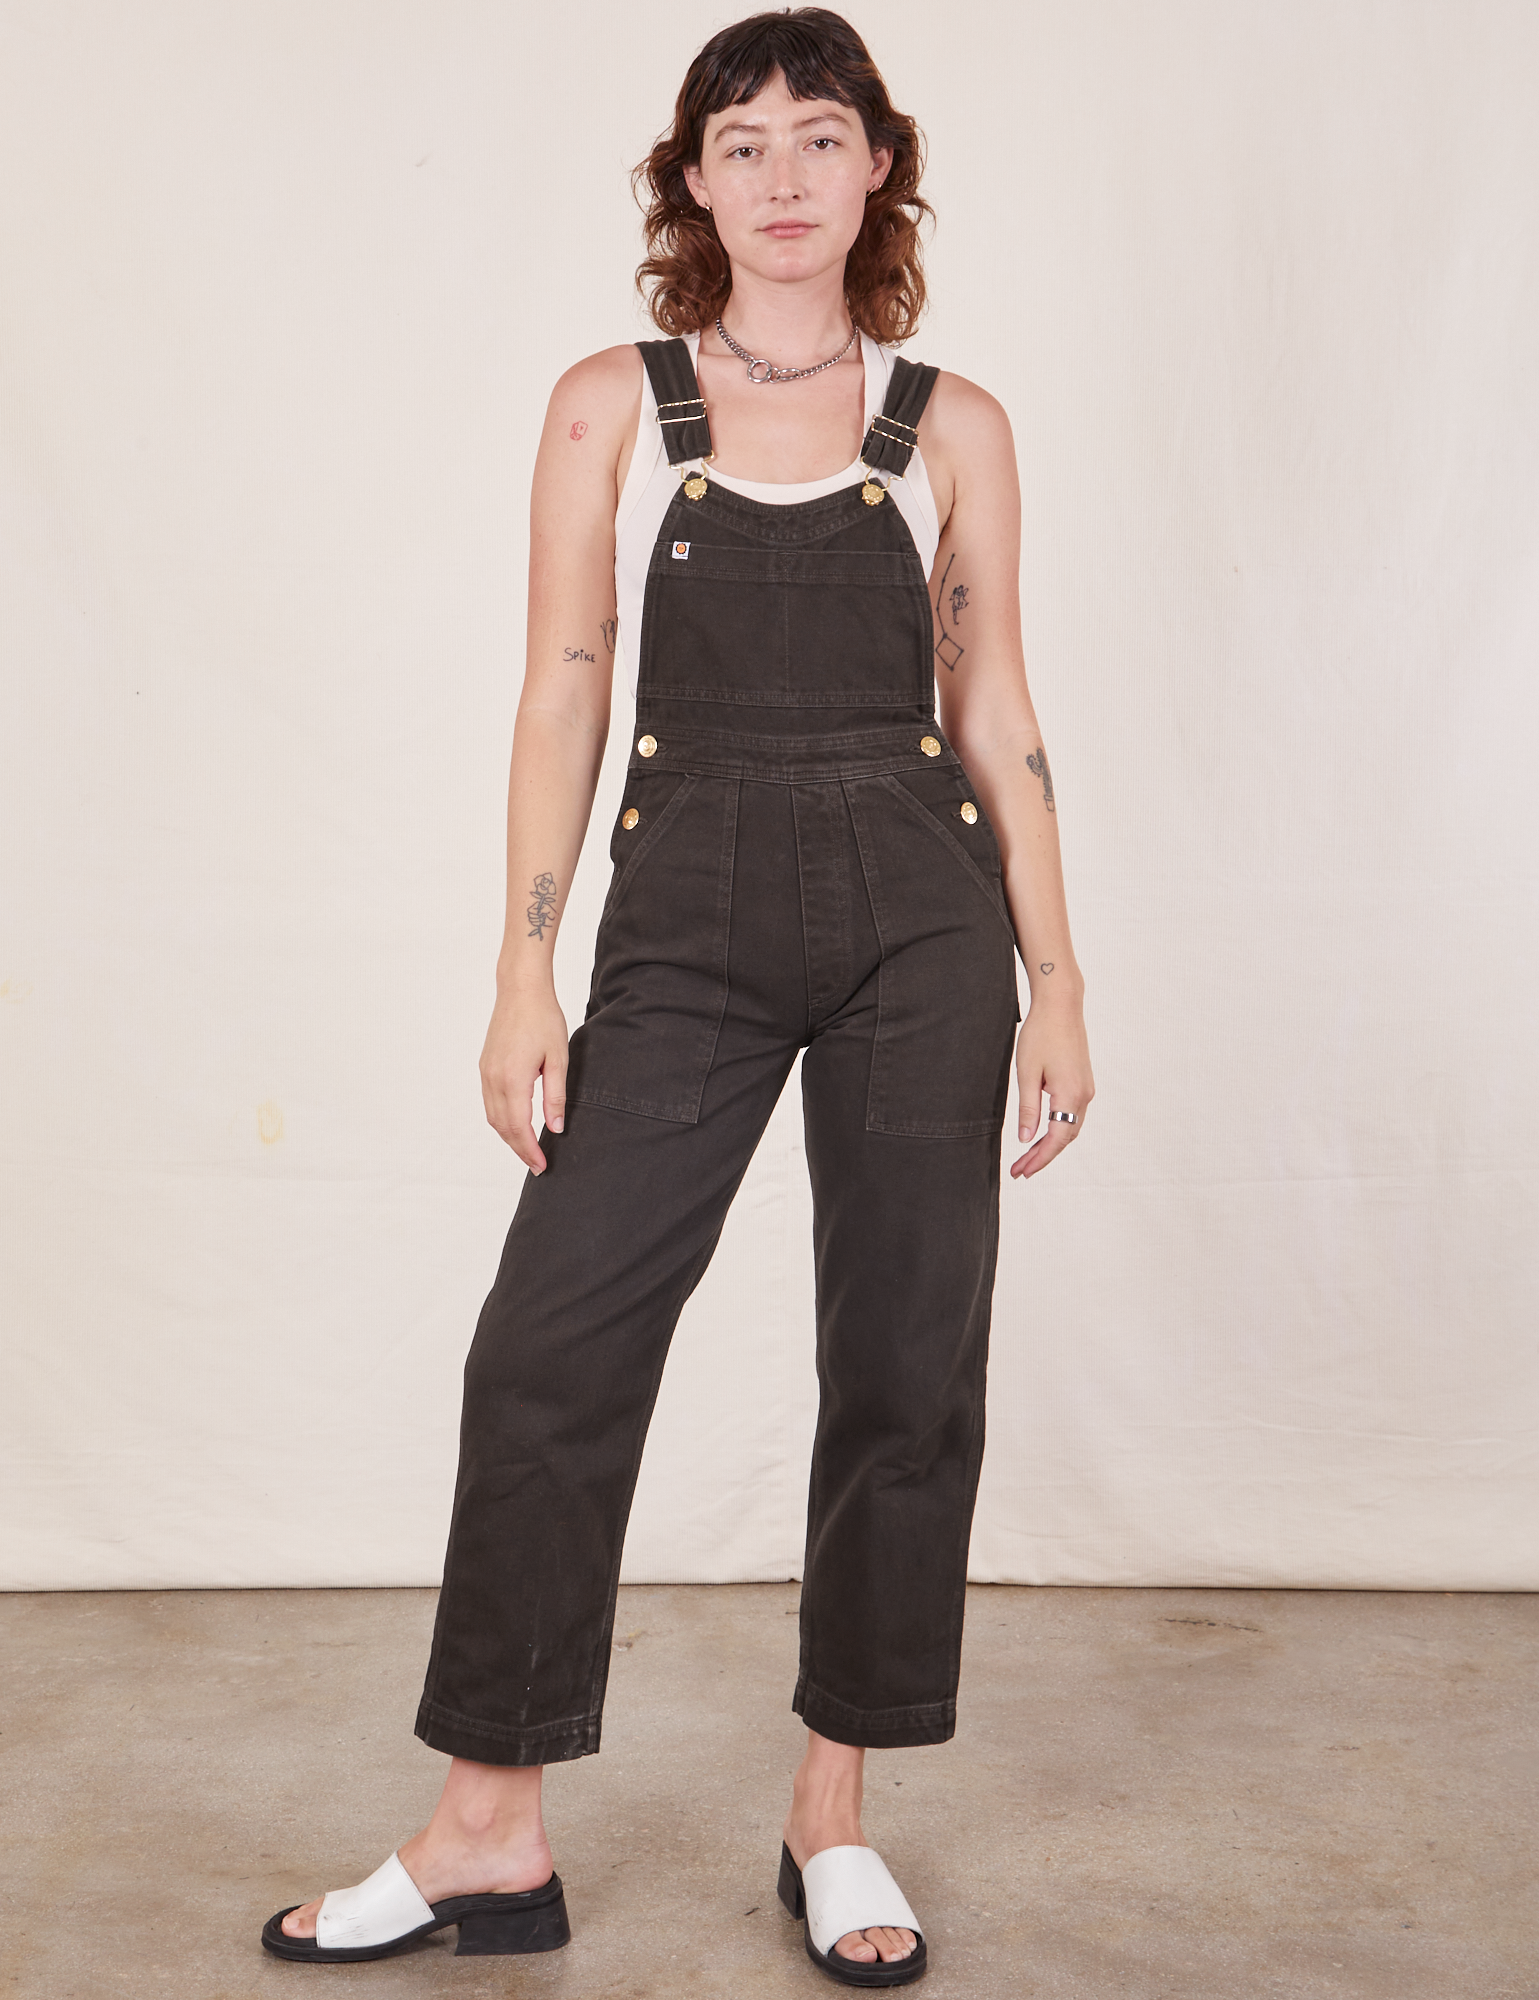 Alex is 5&#39;8&quot;and wearing size P Original Overalls in Mono Espresso with a vintage off-white Cropped Tank Top.